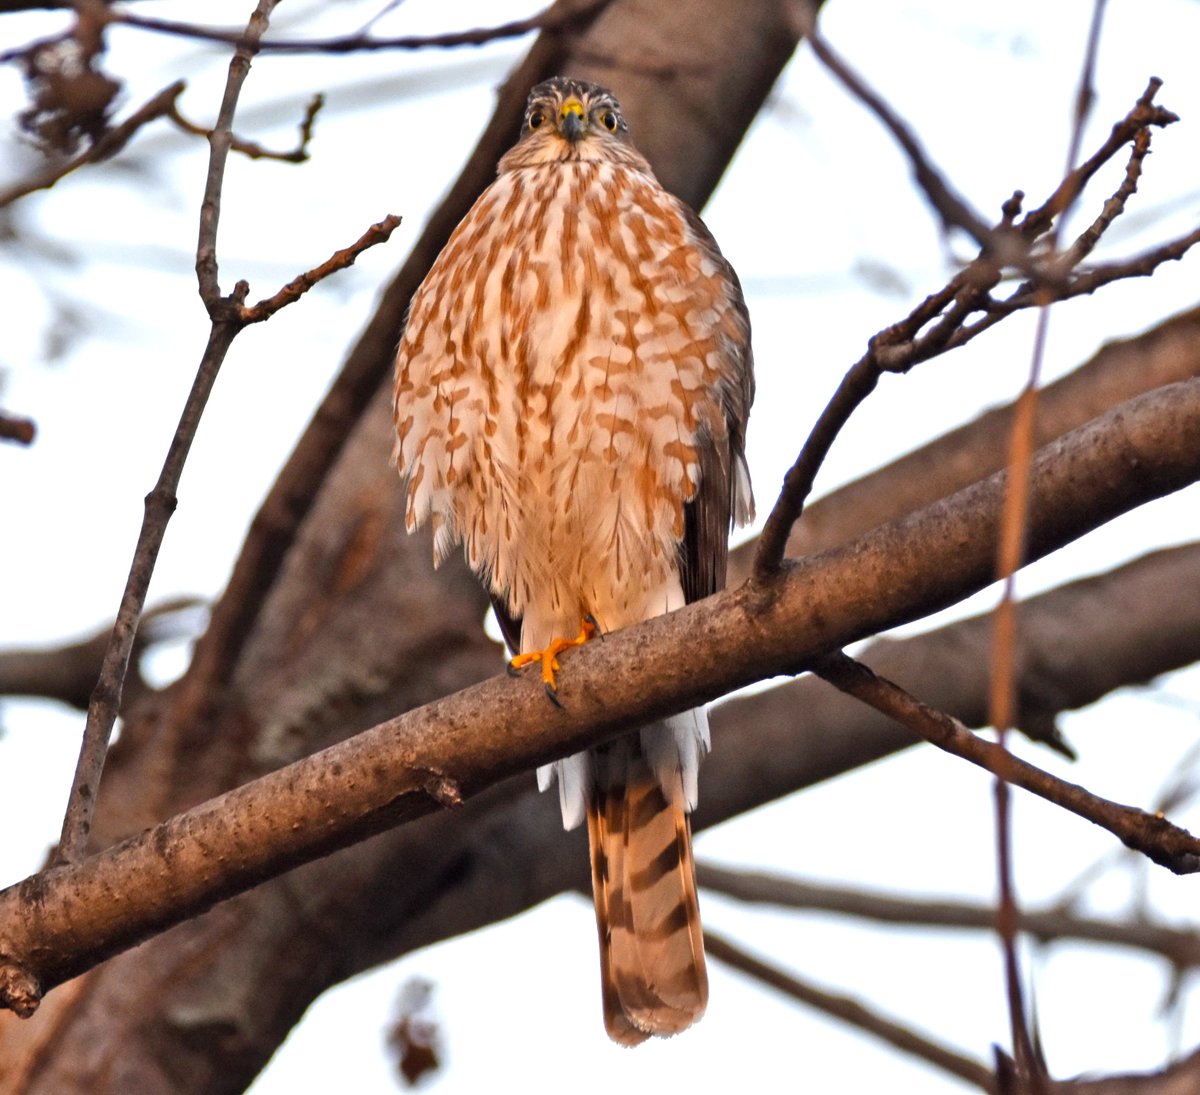 I know today is going to be a good day because as soon as I was about to get into my car to do some quick morning birding before my meeting, a mysterious bird flew onto the branch of a tree near my car. 
Quite a borb, I thought, #SharpShinnedHawk !